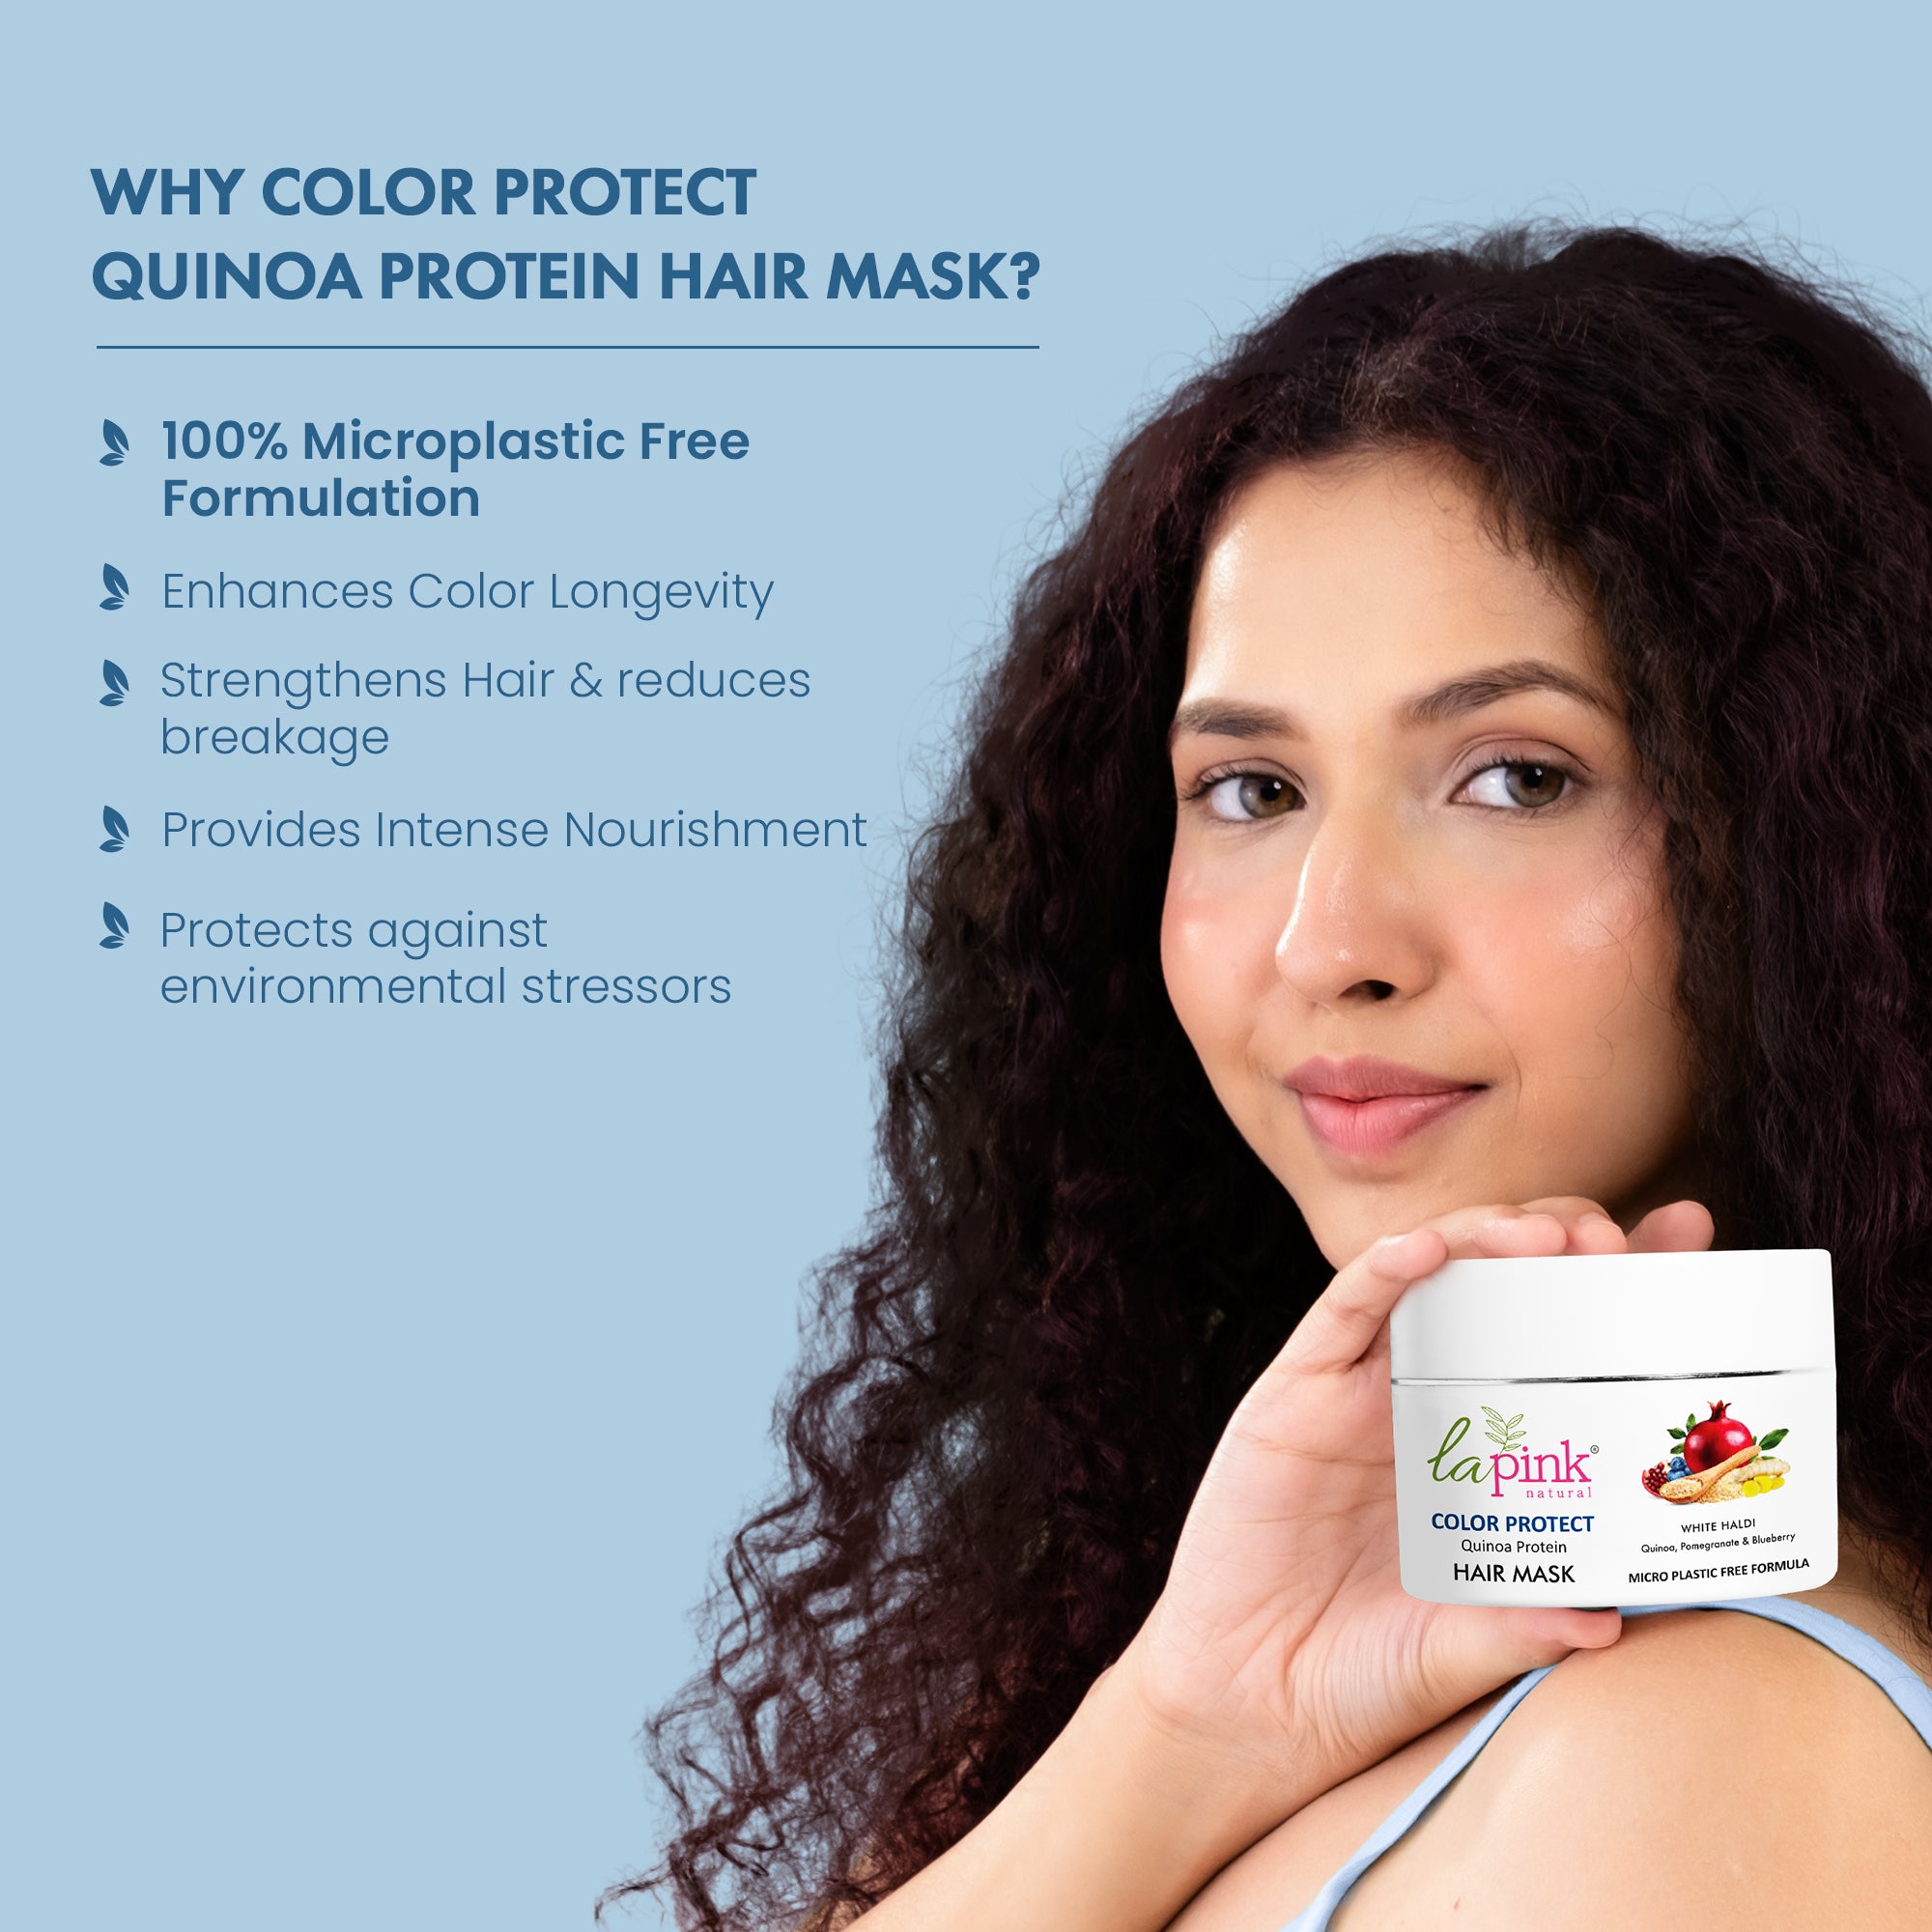 Color Protect Quinoa Protein Hair Mask with White Haldi to Increase Longevity